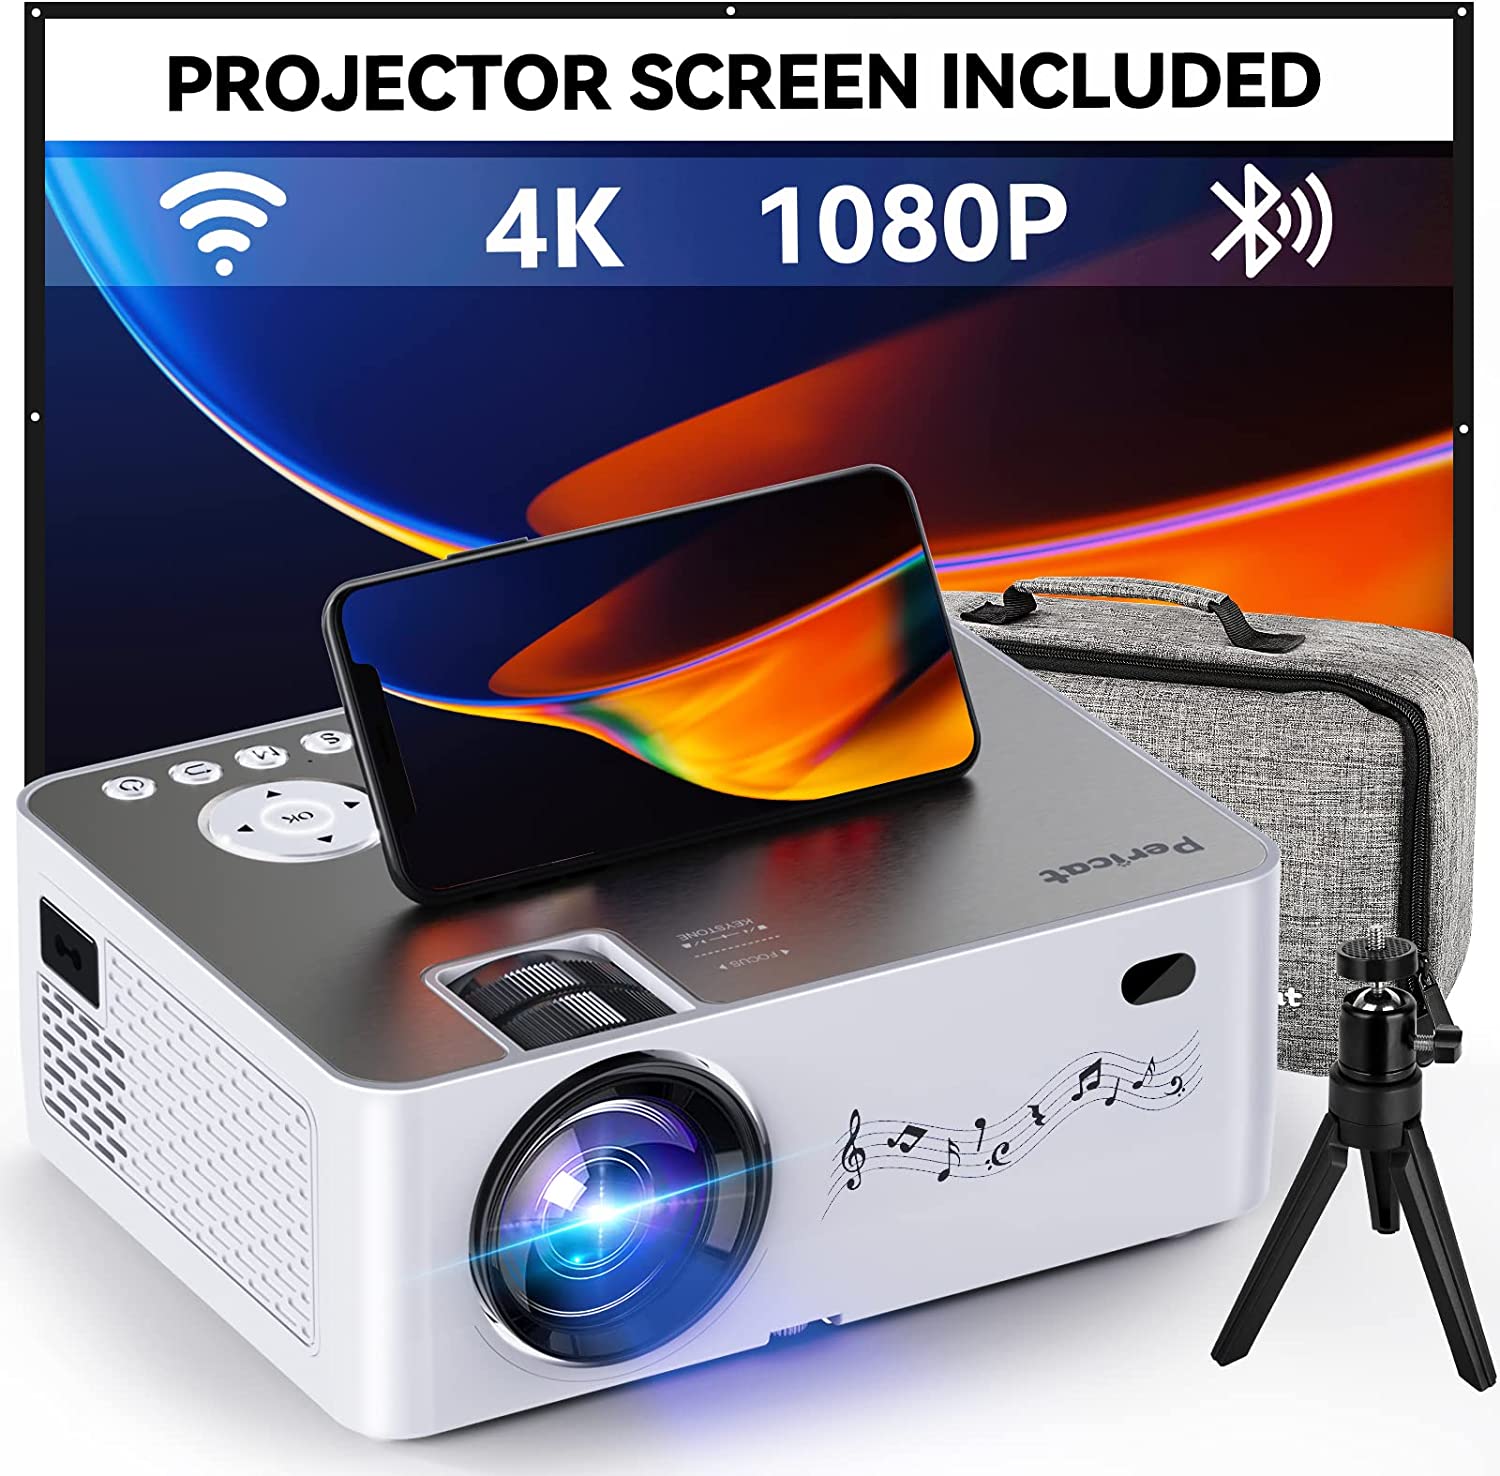 Projector with WiFi and Bluetooth, 5G WiFi Mini Projector, Native1080P –  Pericat